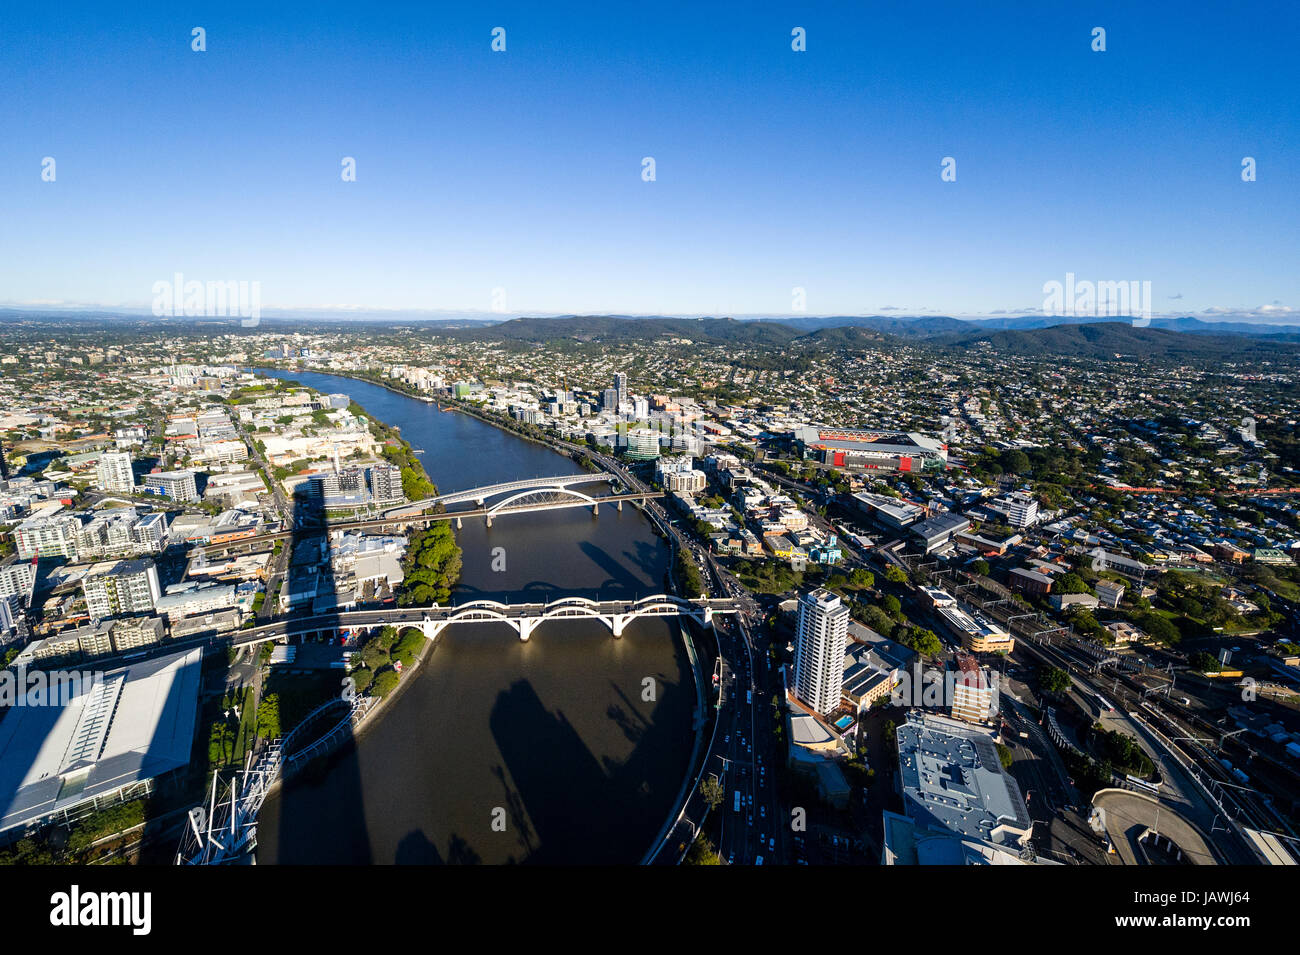 The sprawling Brisbane city and suburbs and Brisbane River. Stock Photo